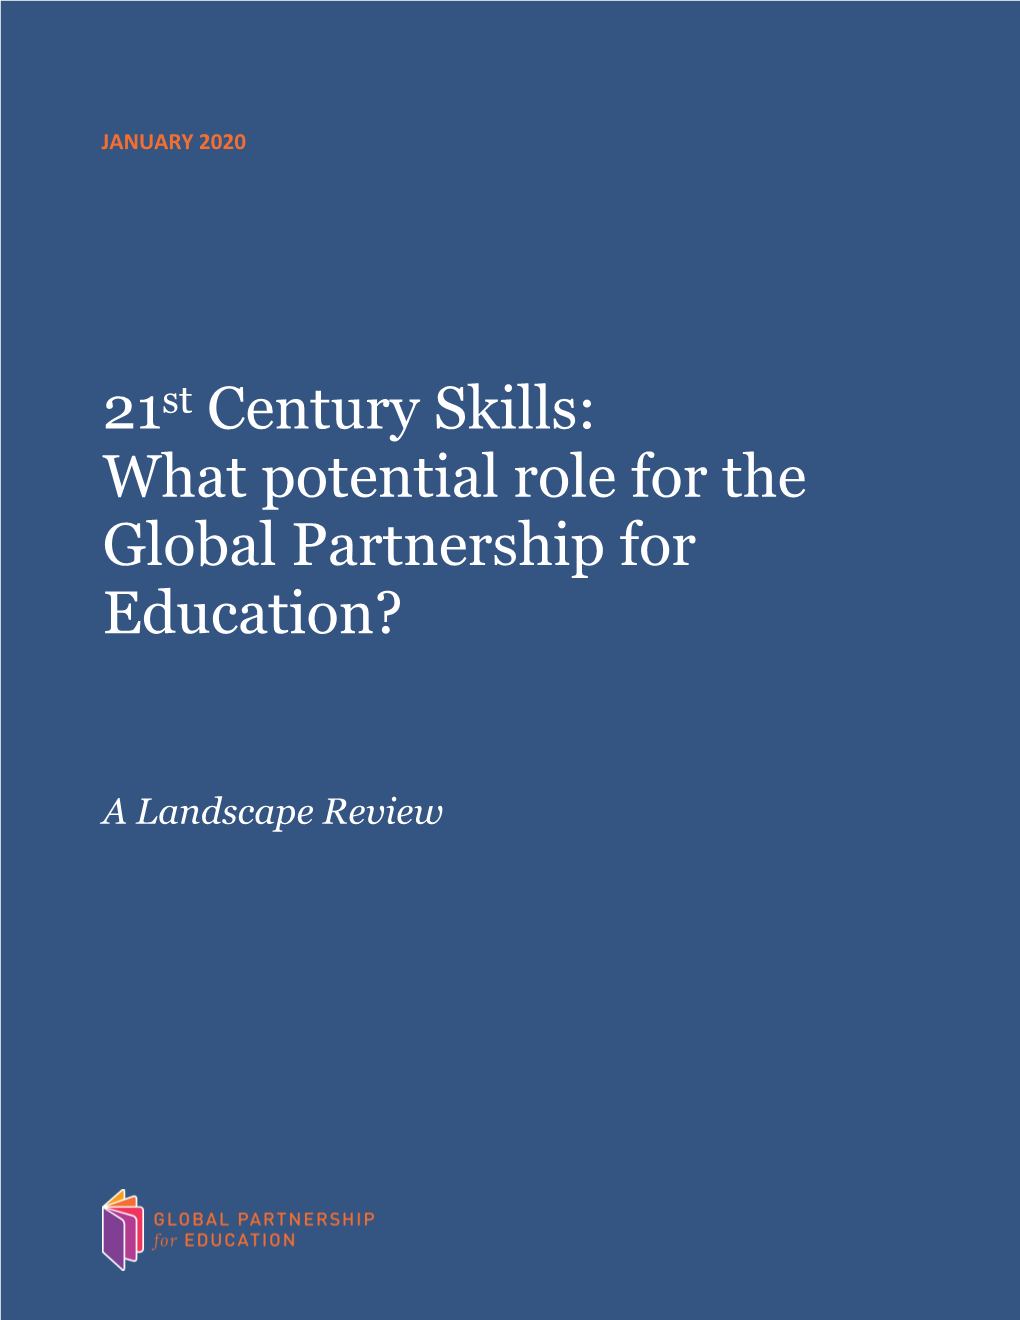 21St Century Skills: What Potential Role for the Global Partnership for Education?